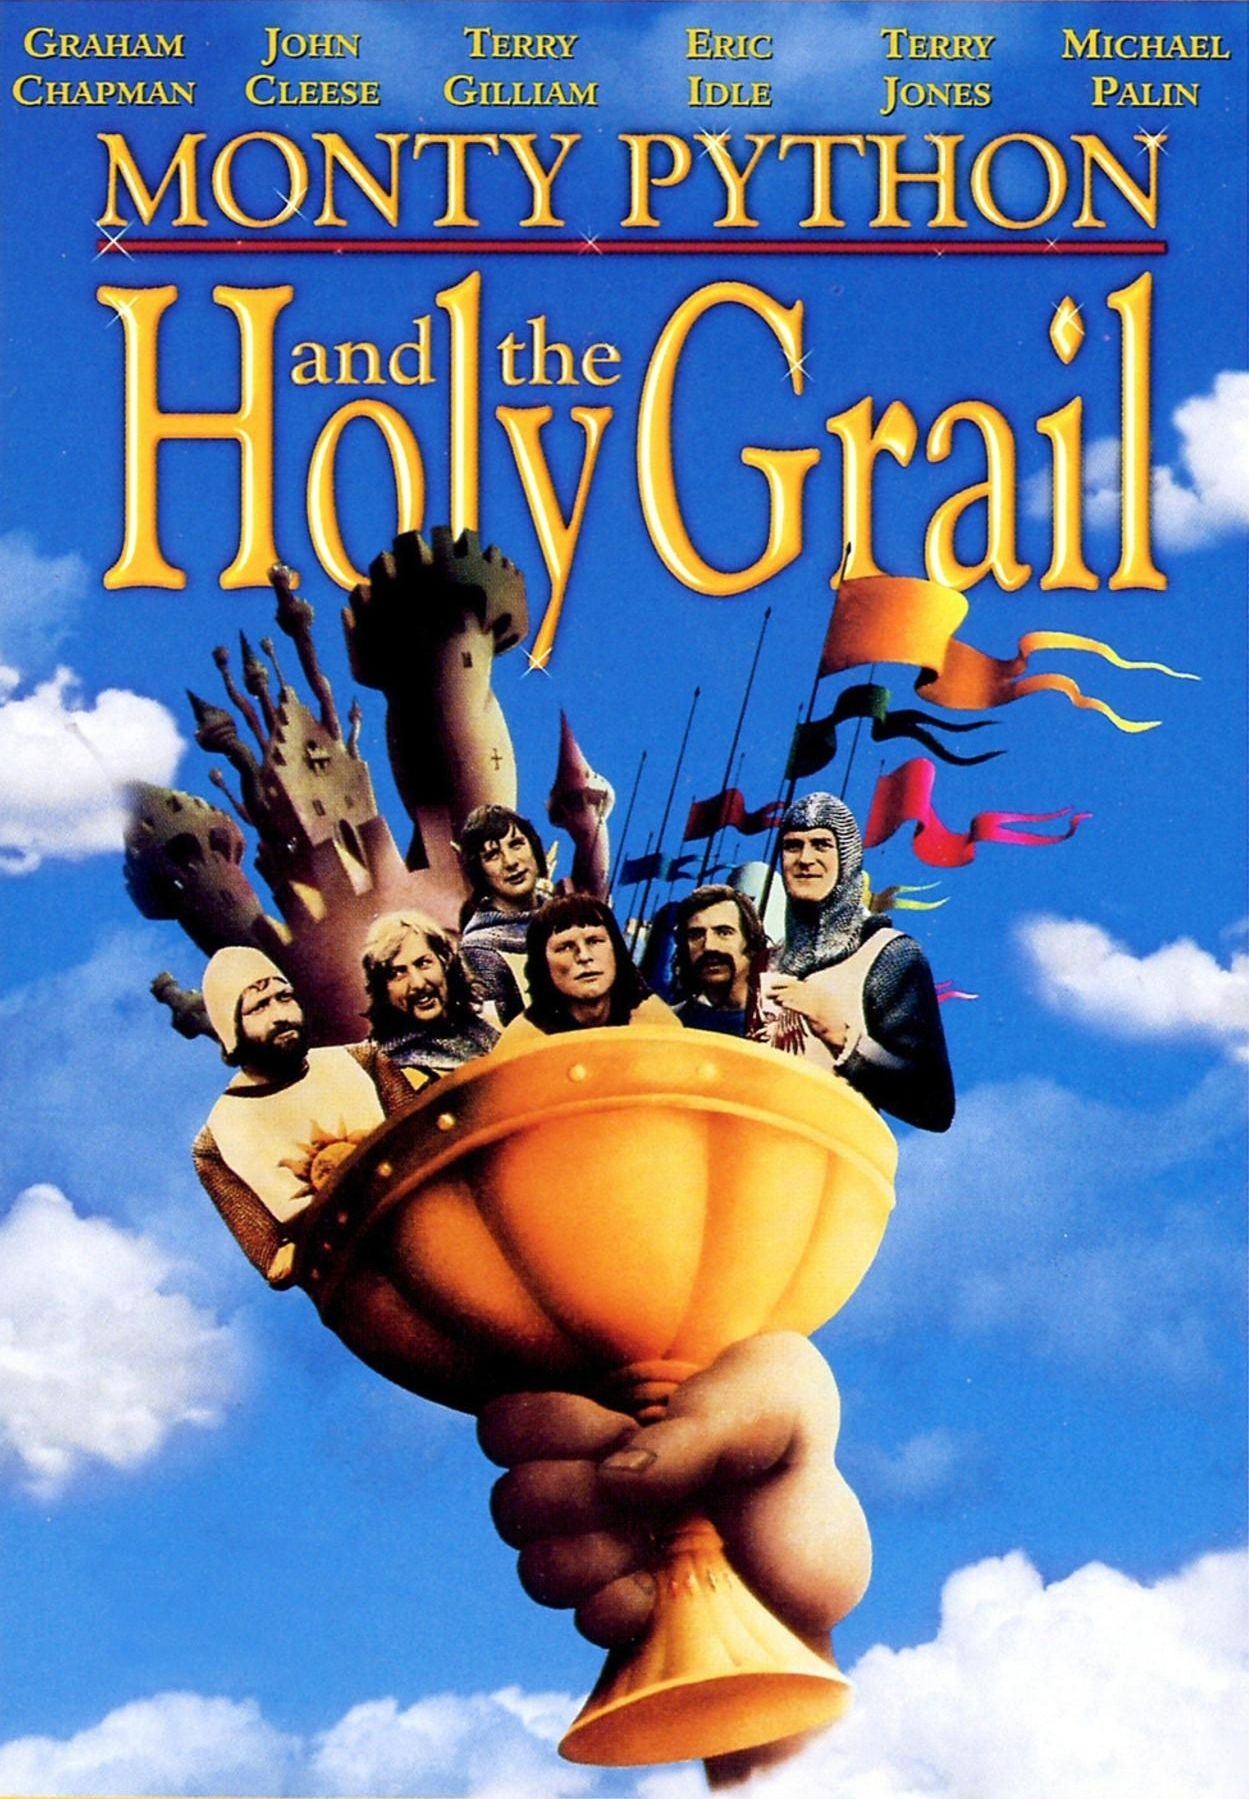 Monty Python and the Holy Grail.jpg